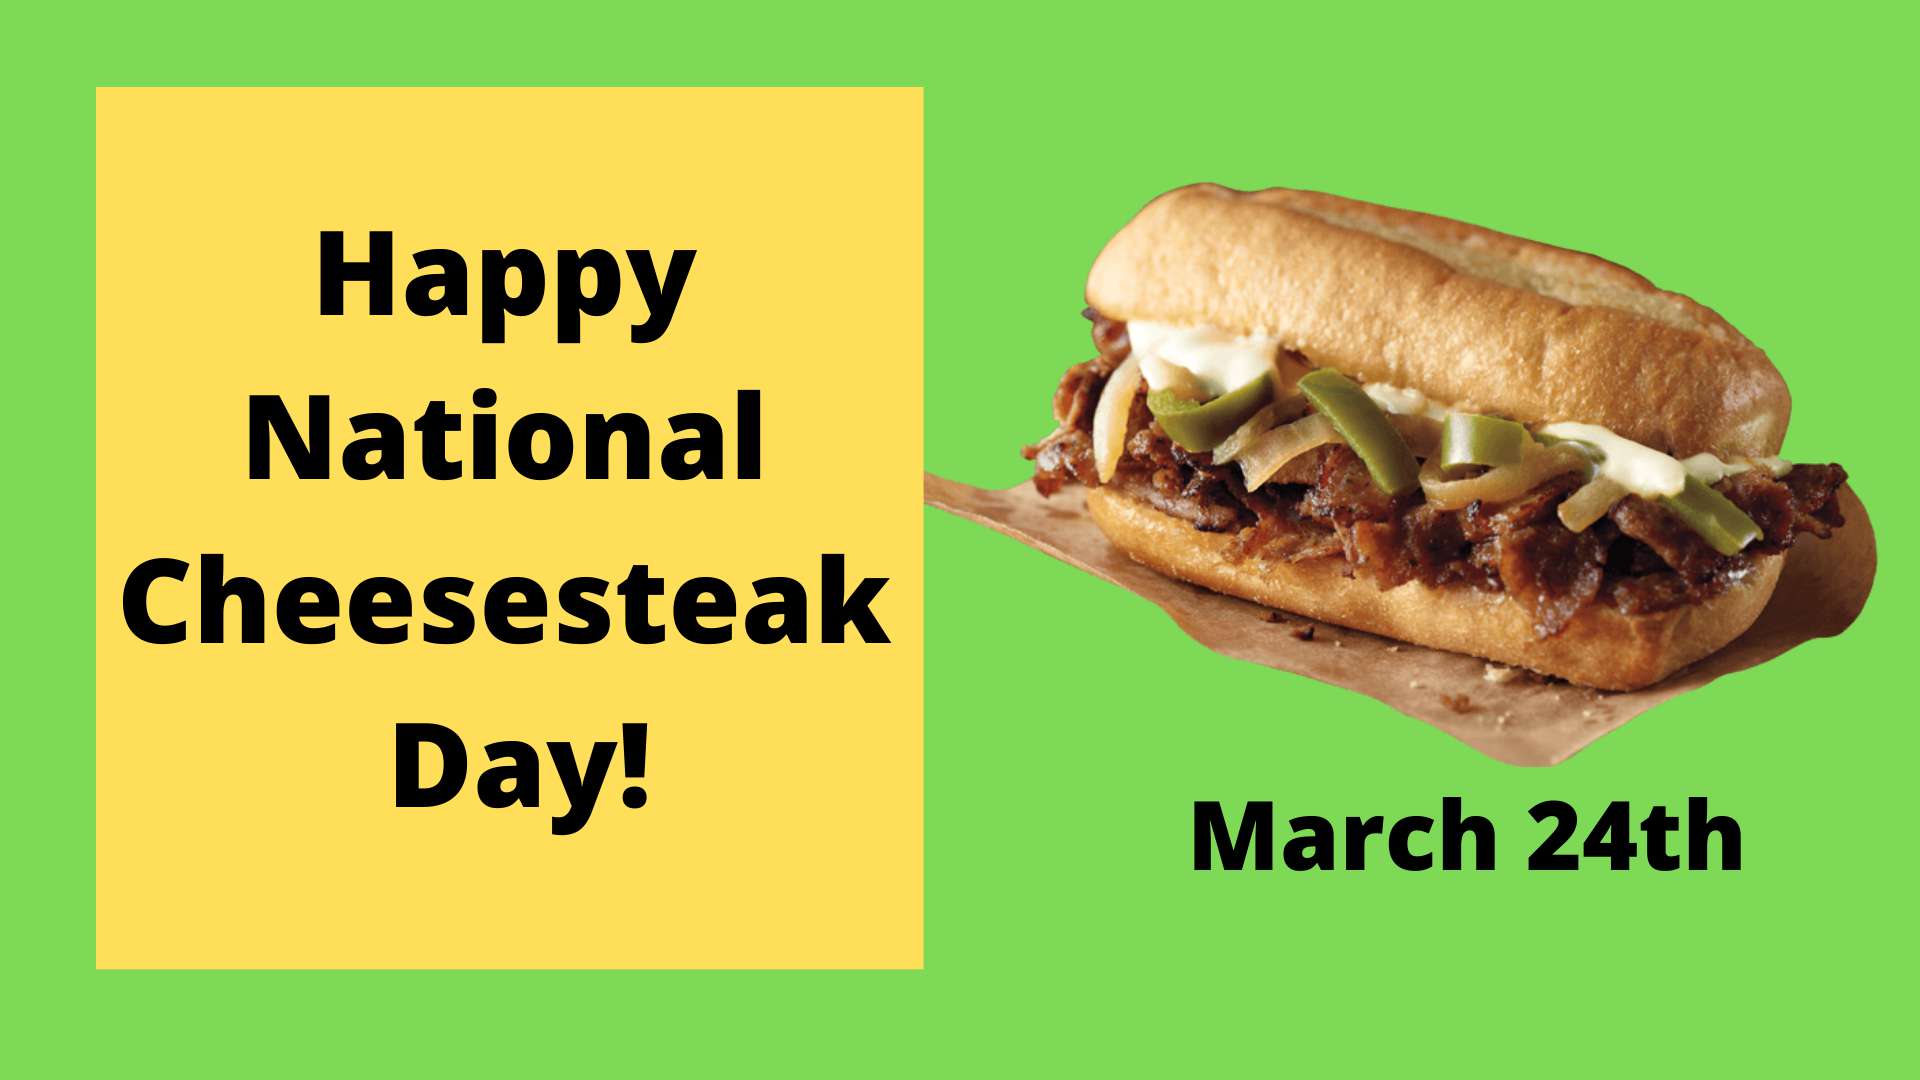 National Cheesesteak Day Wishes Unique Image